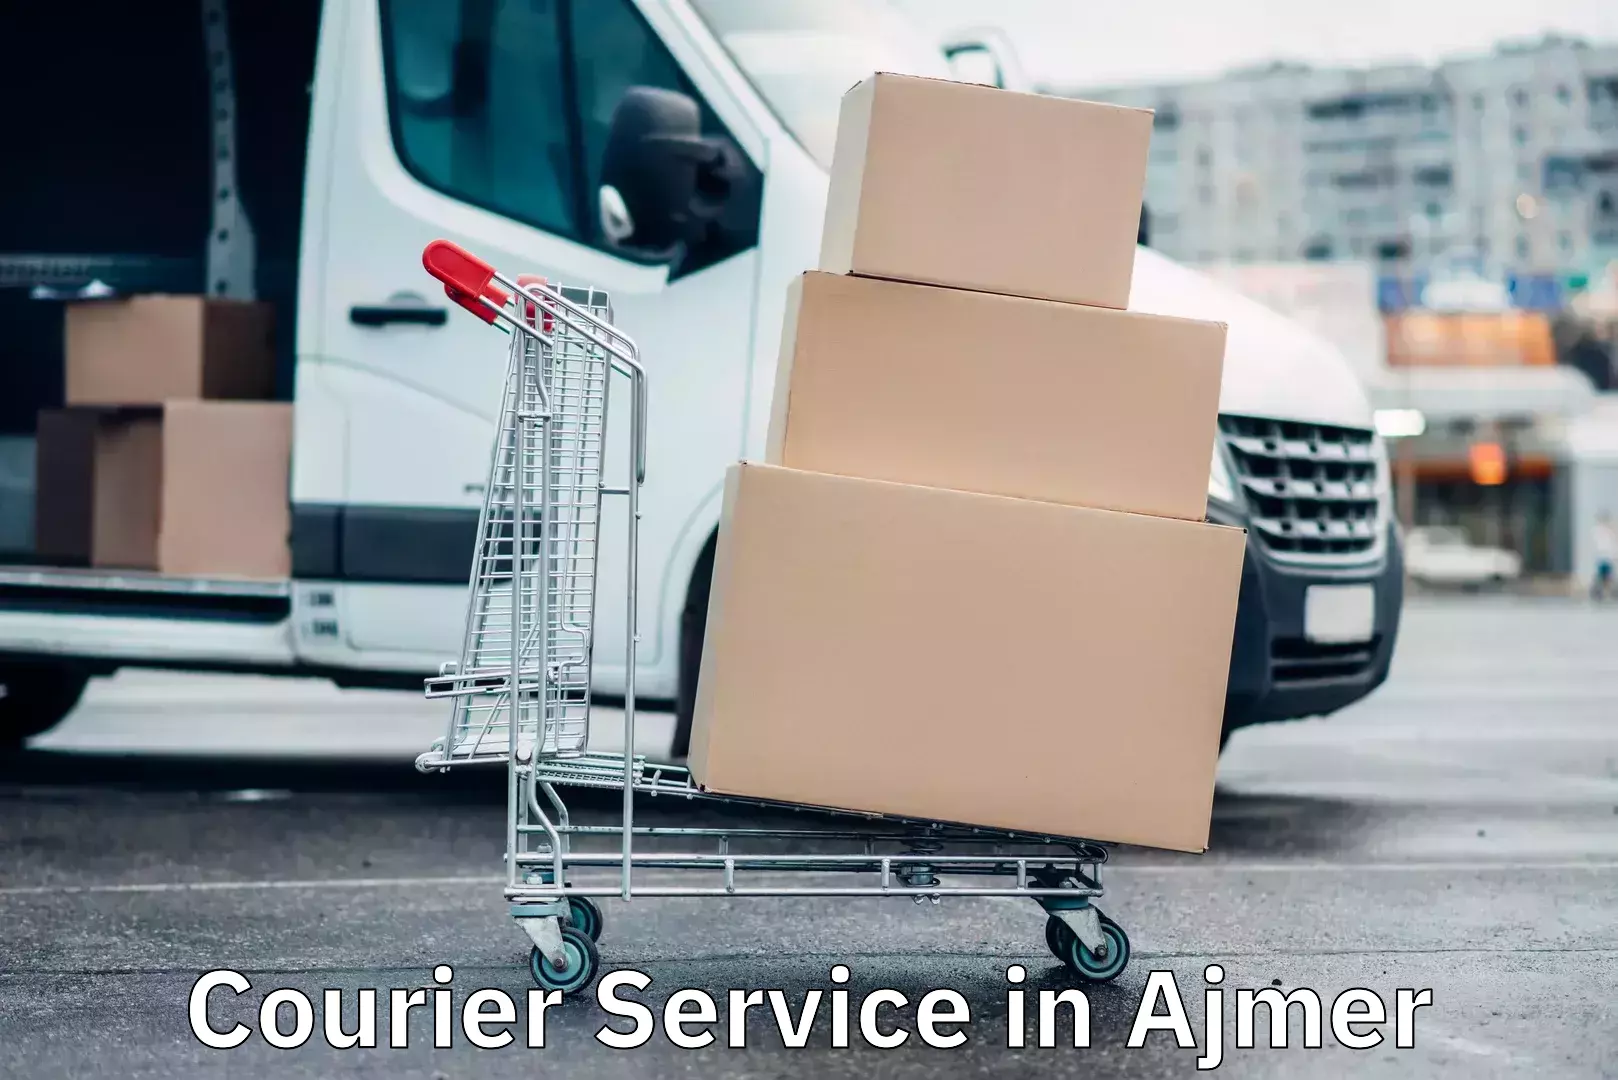 High-speed delivery in Ajmer